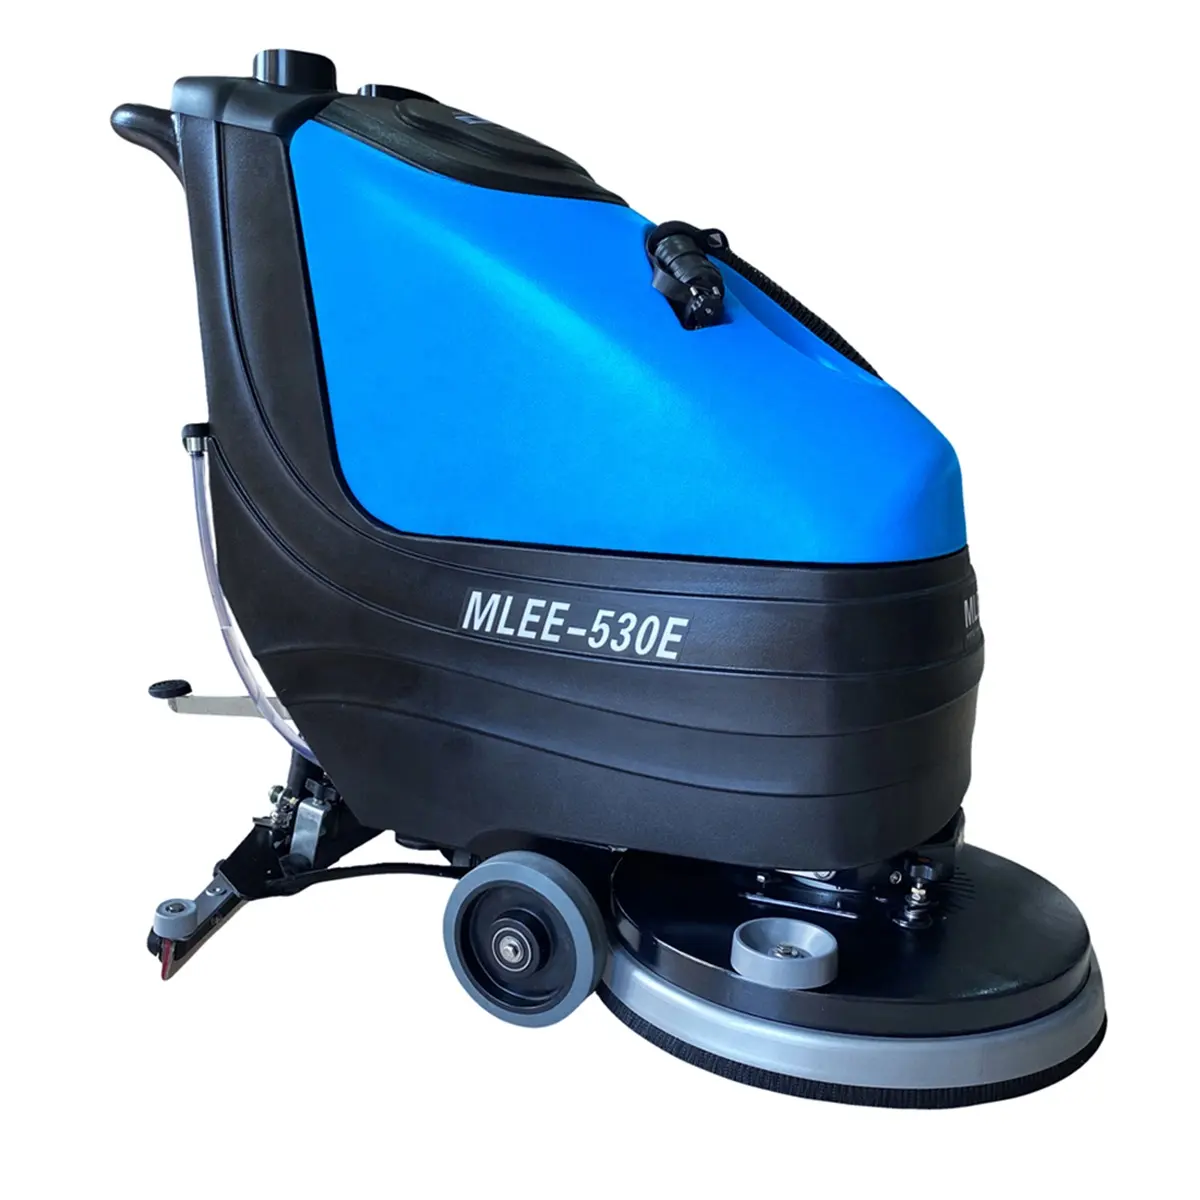 MLEE-530E Electric Floor Scrubber Dryer Walk Behind 15M Cable Smart Cord Floor Cleaning Machine